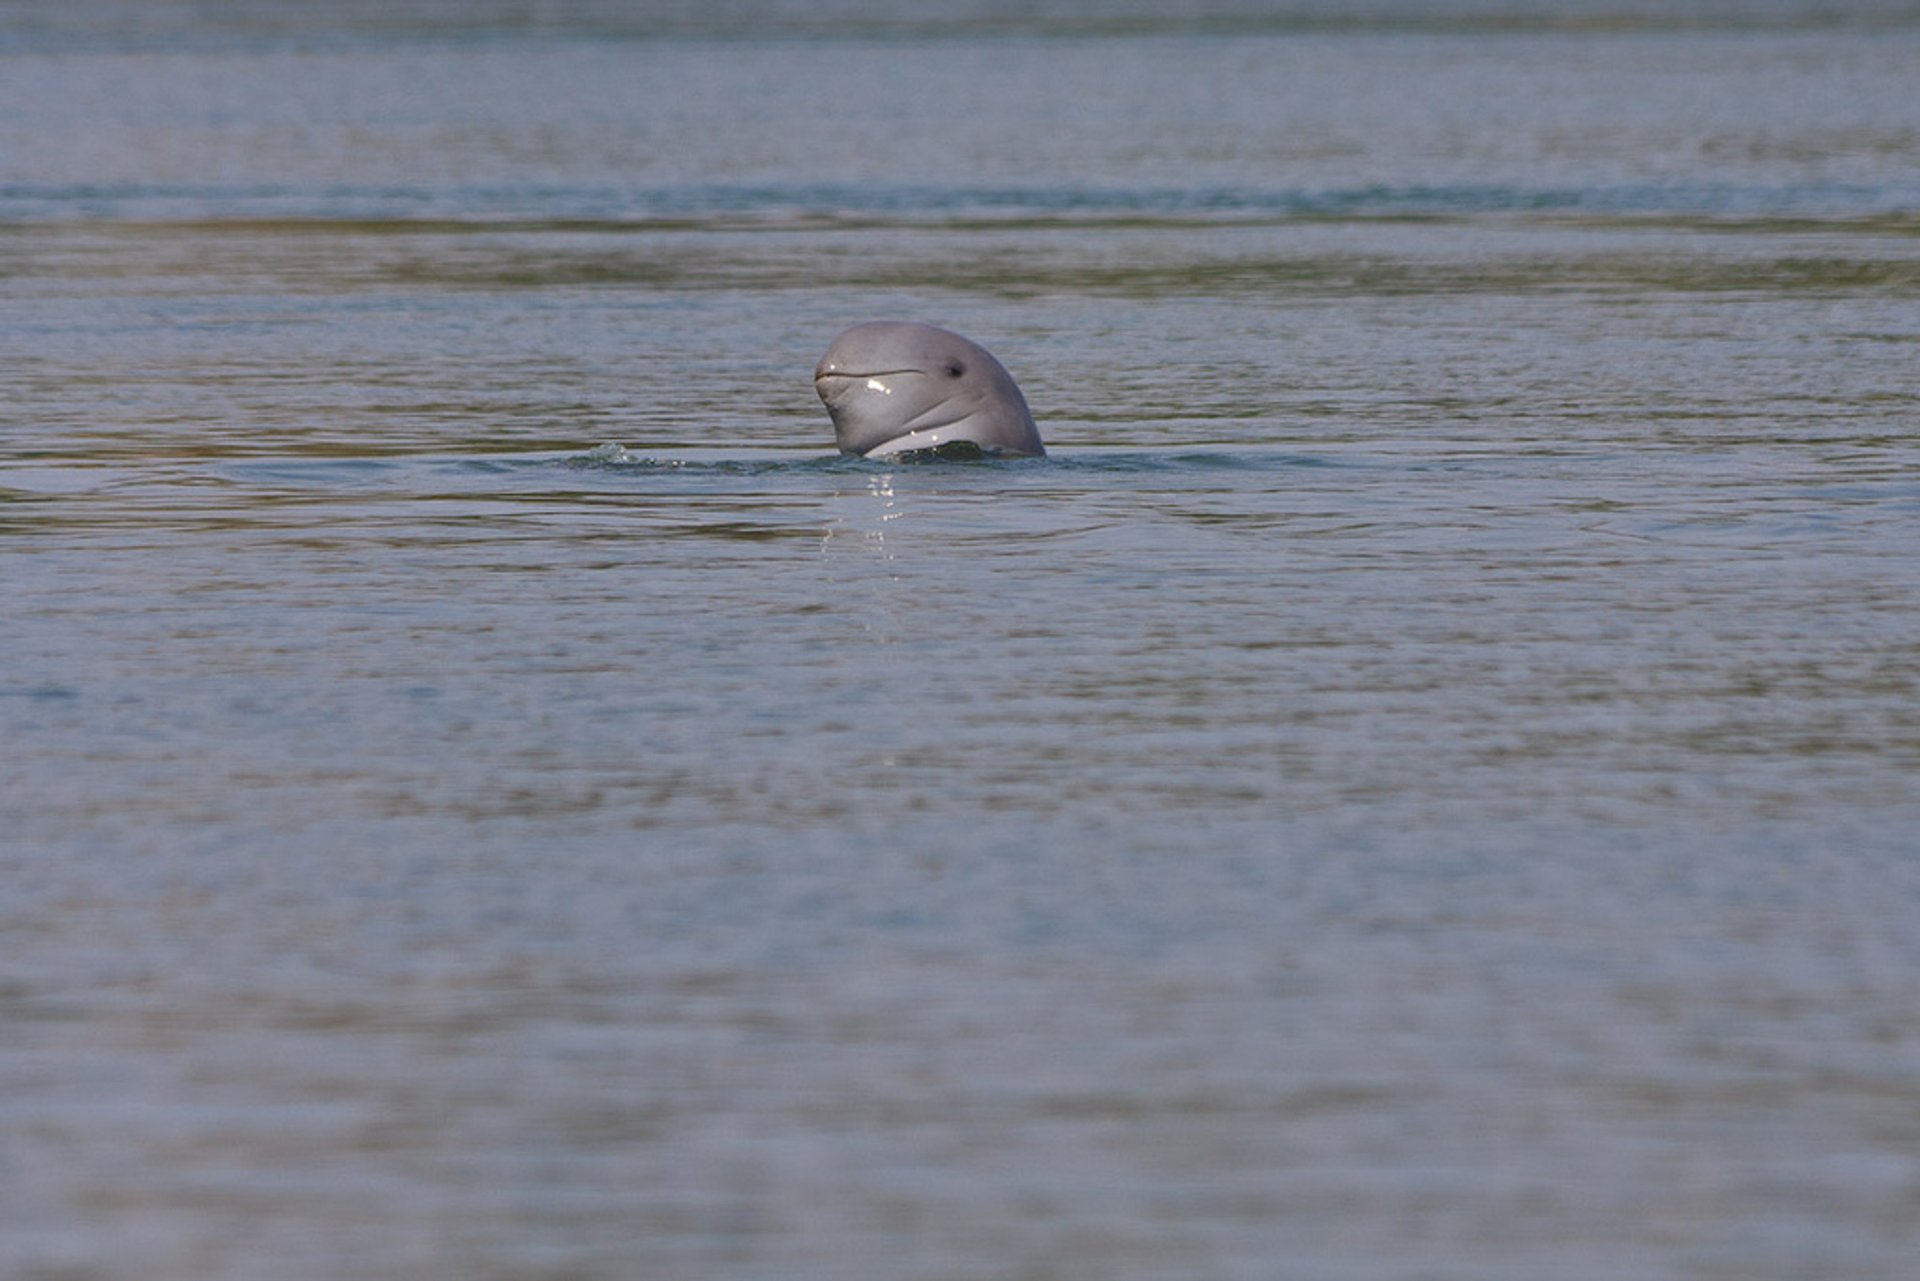 Mekong River Dolphin